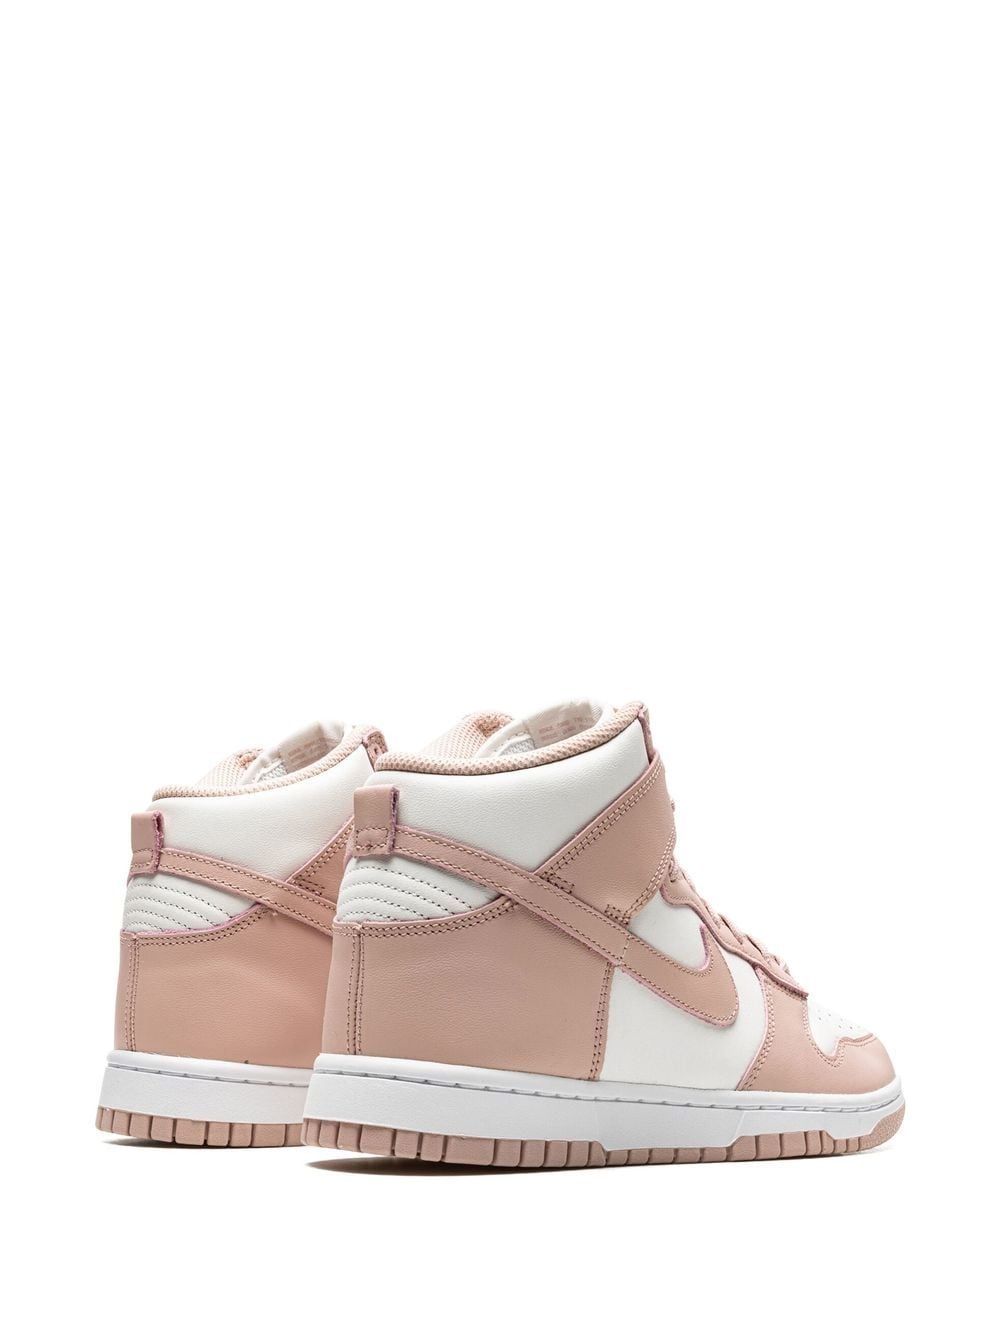 Dunk High “Pink Oxford” sneakers - 3